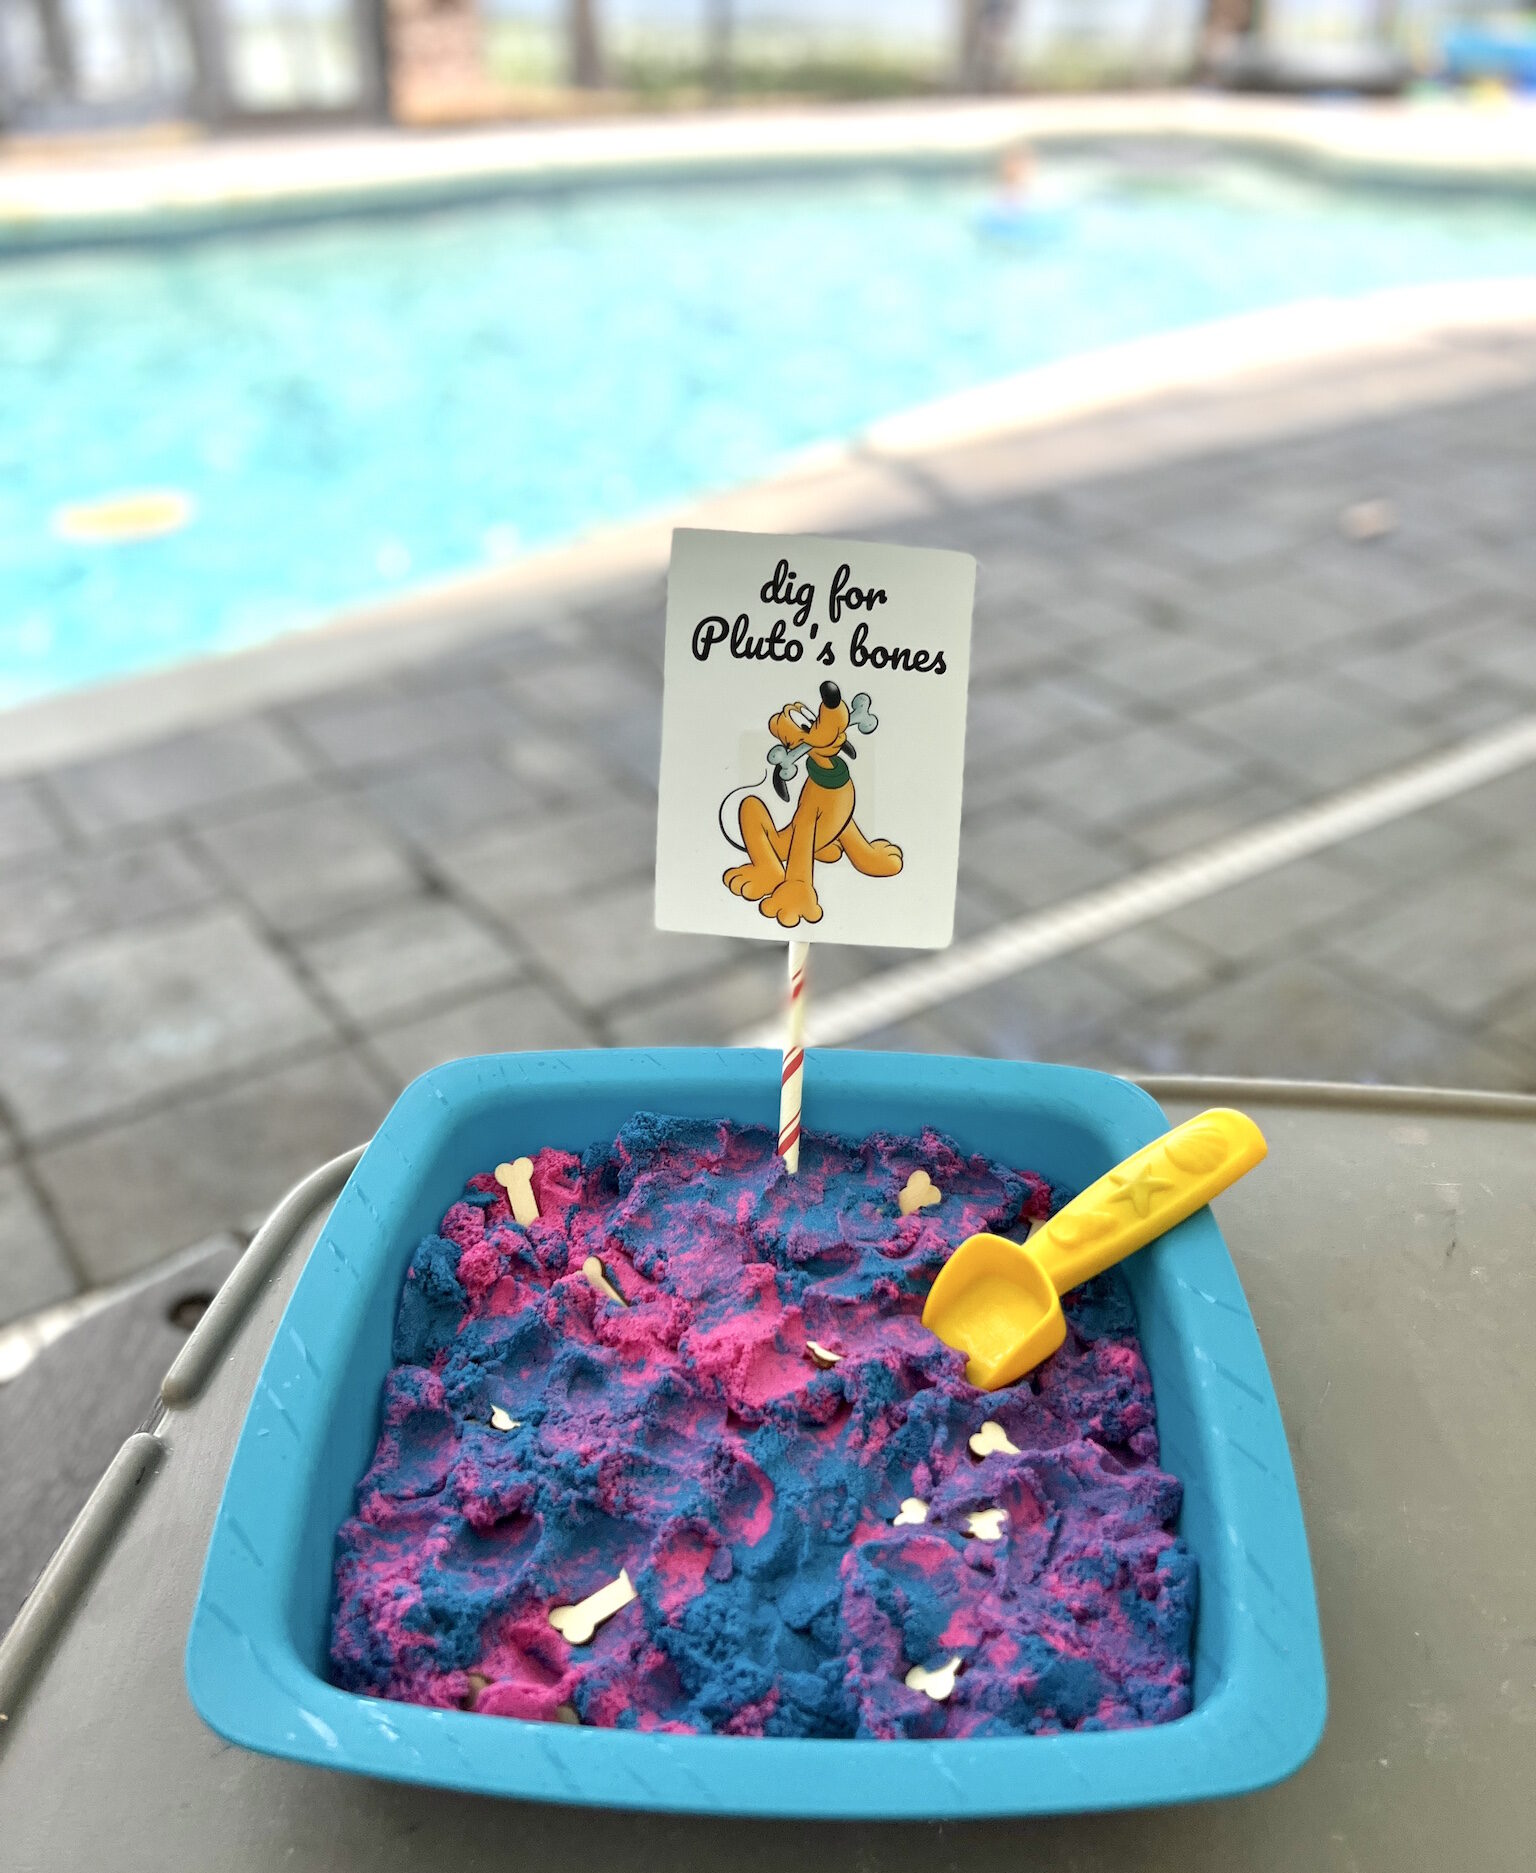 Dig for Pluto's Bones Sensory Bin Activity at Pepper's Magical Mickey & Minnie Mouse 3rd Birthday Party!